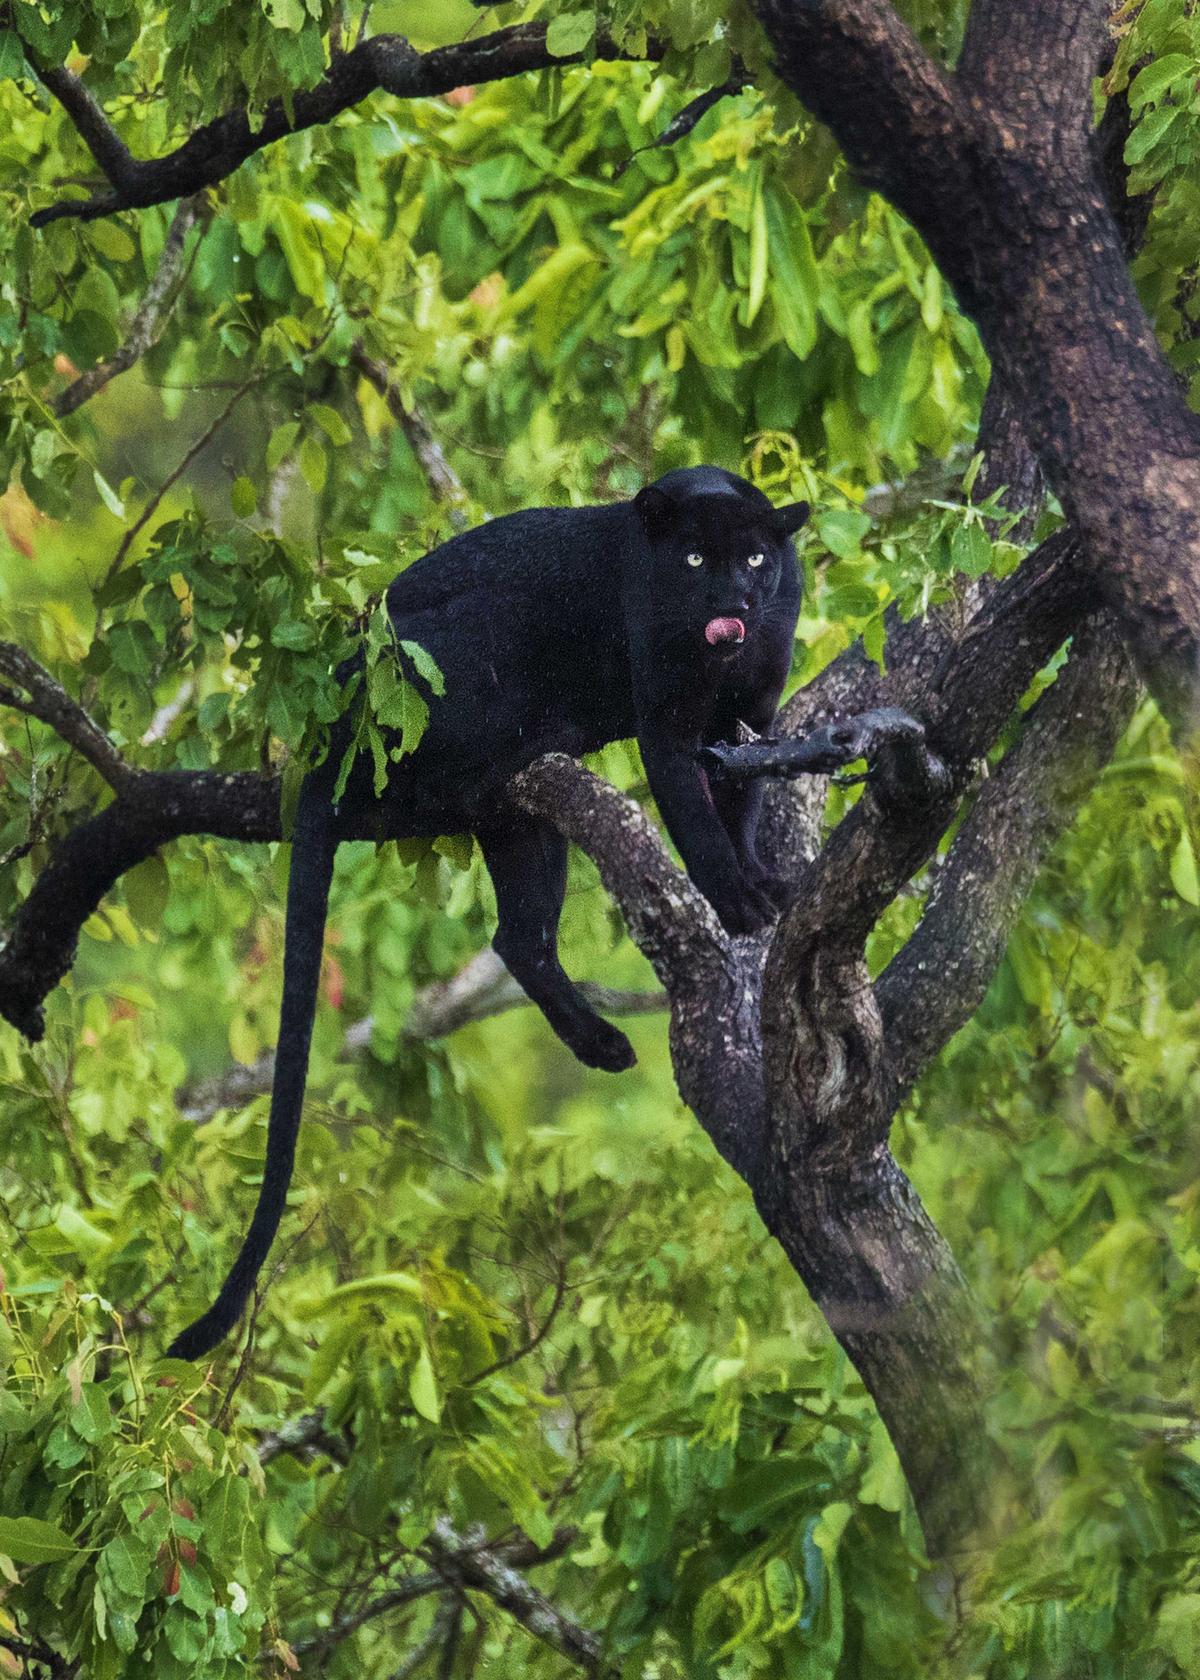 A rare black panther in a tree looks down at the photographer. (Courtesy of Caters News)